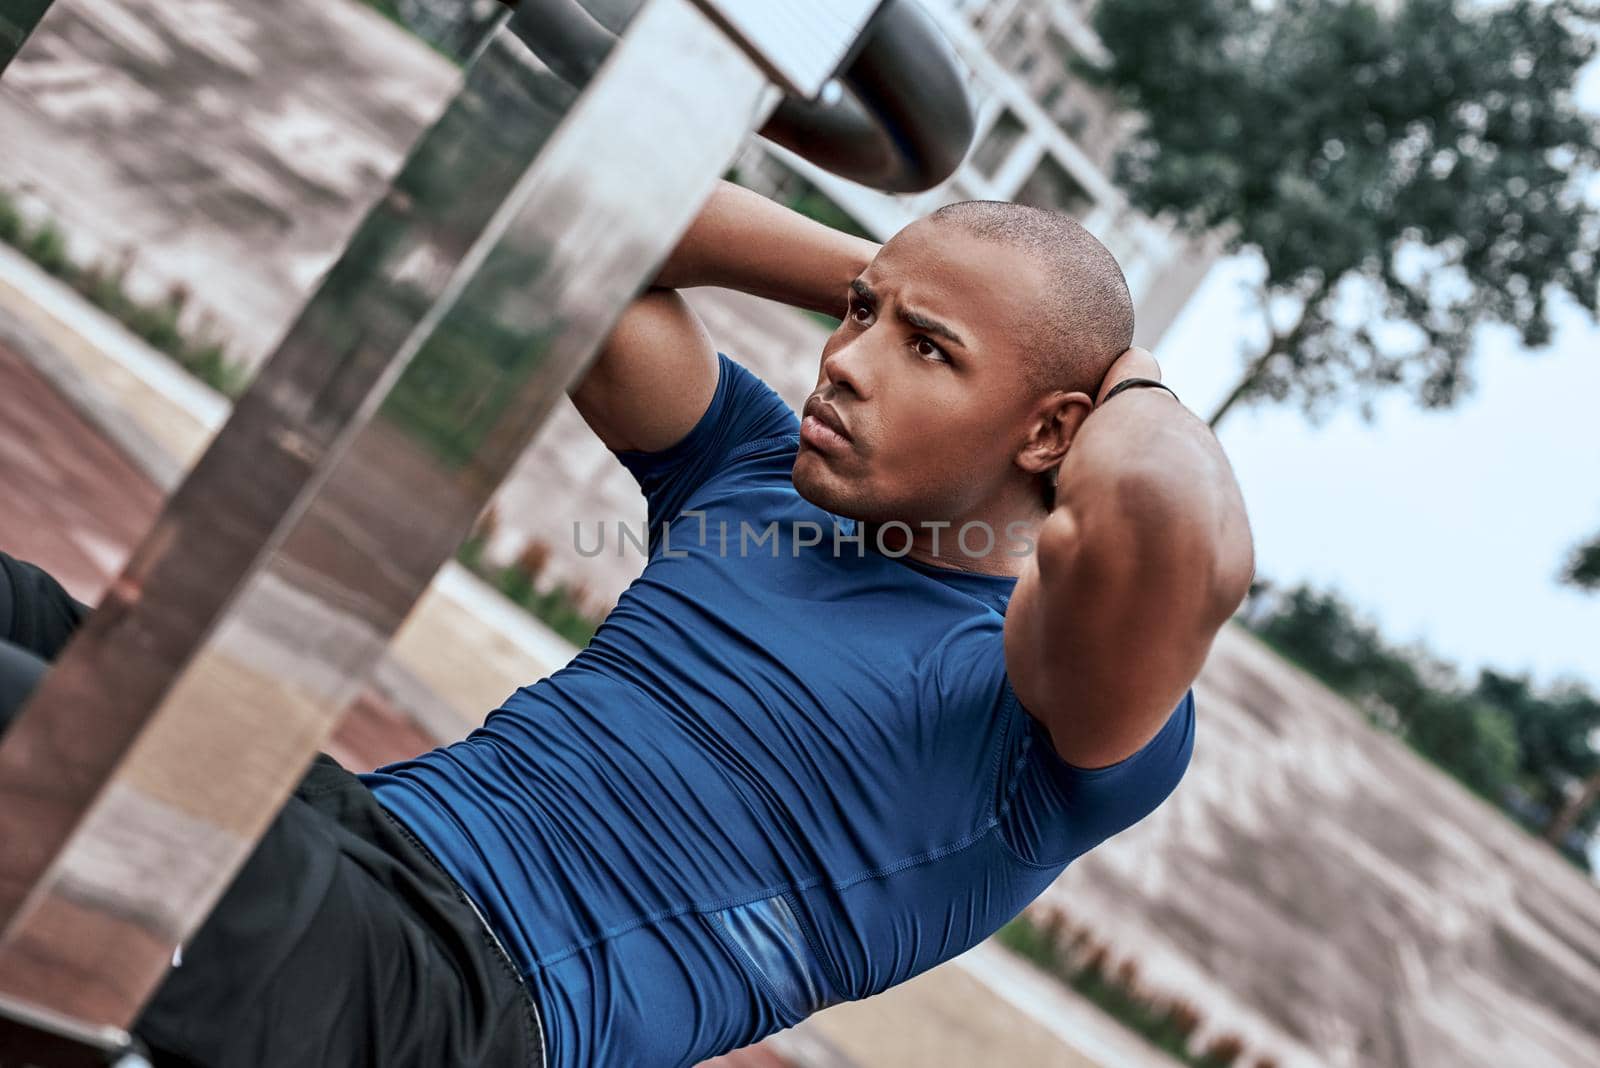 Handsome african man is doing stretching exercises at open air gym near the park. He uses exercises for his abdomen